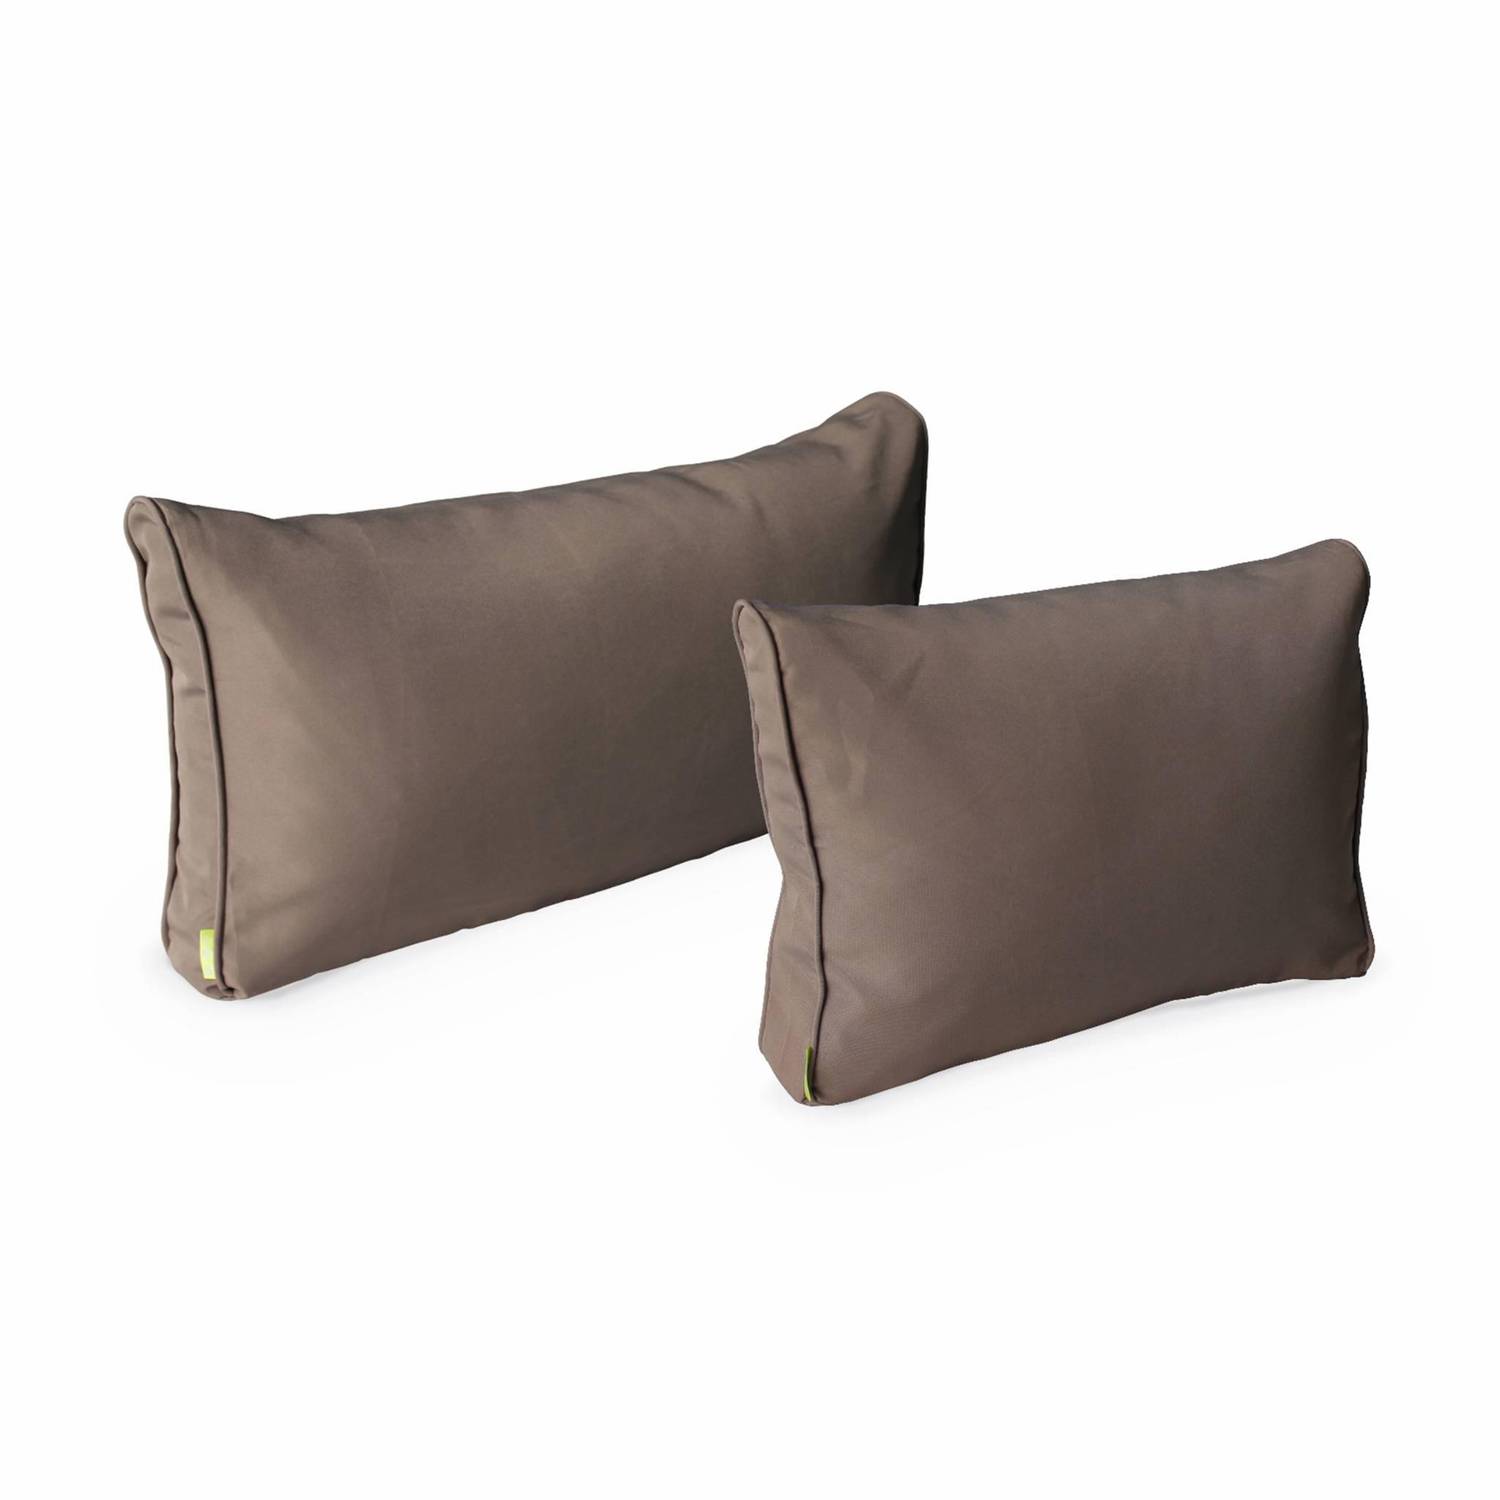 Complete set of cushion covers - Napoli - Beige-Brown Photo2